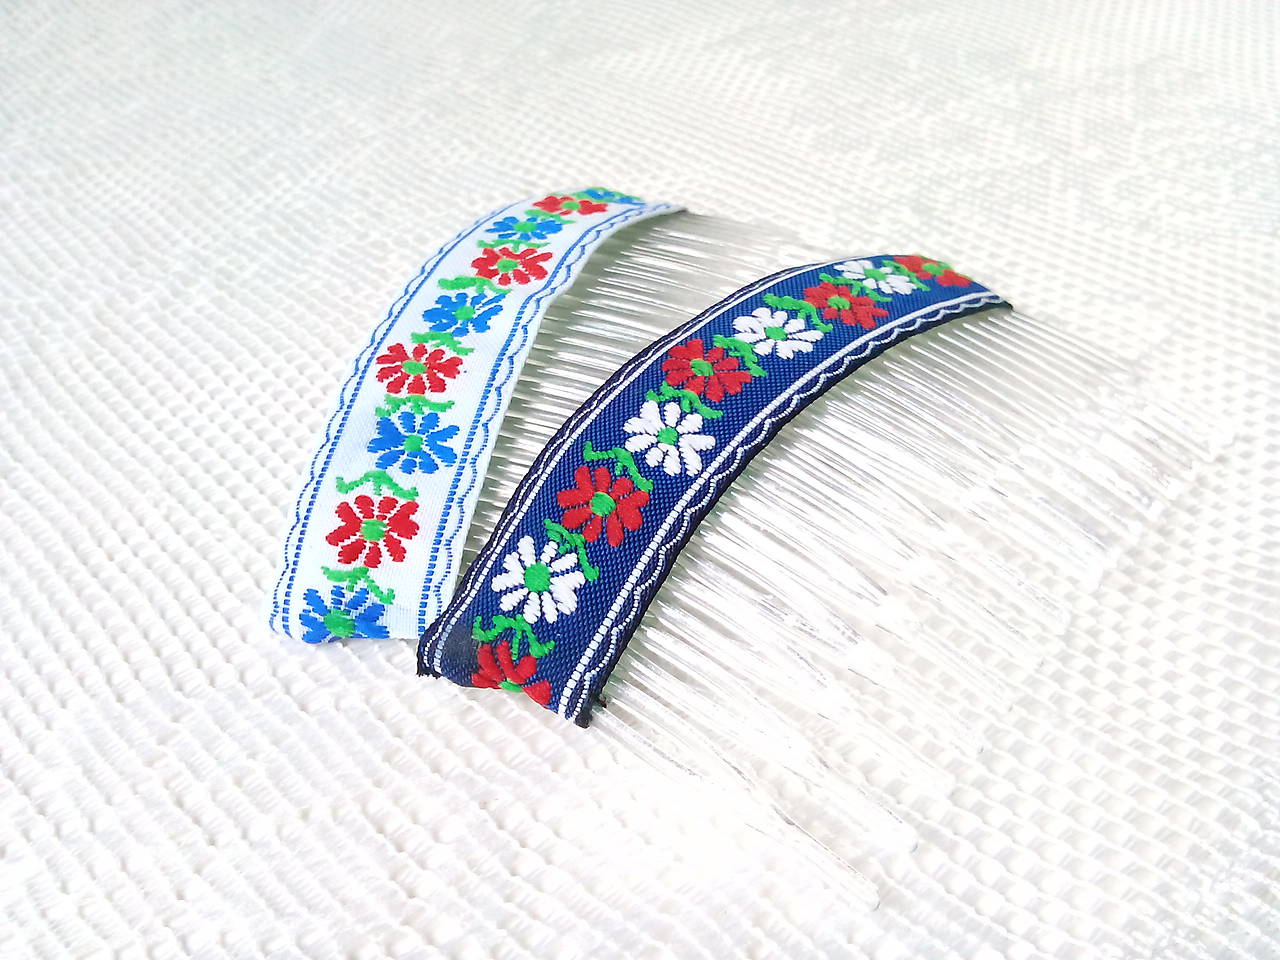 Folklore hair combs